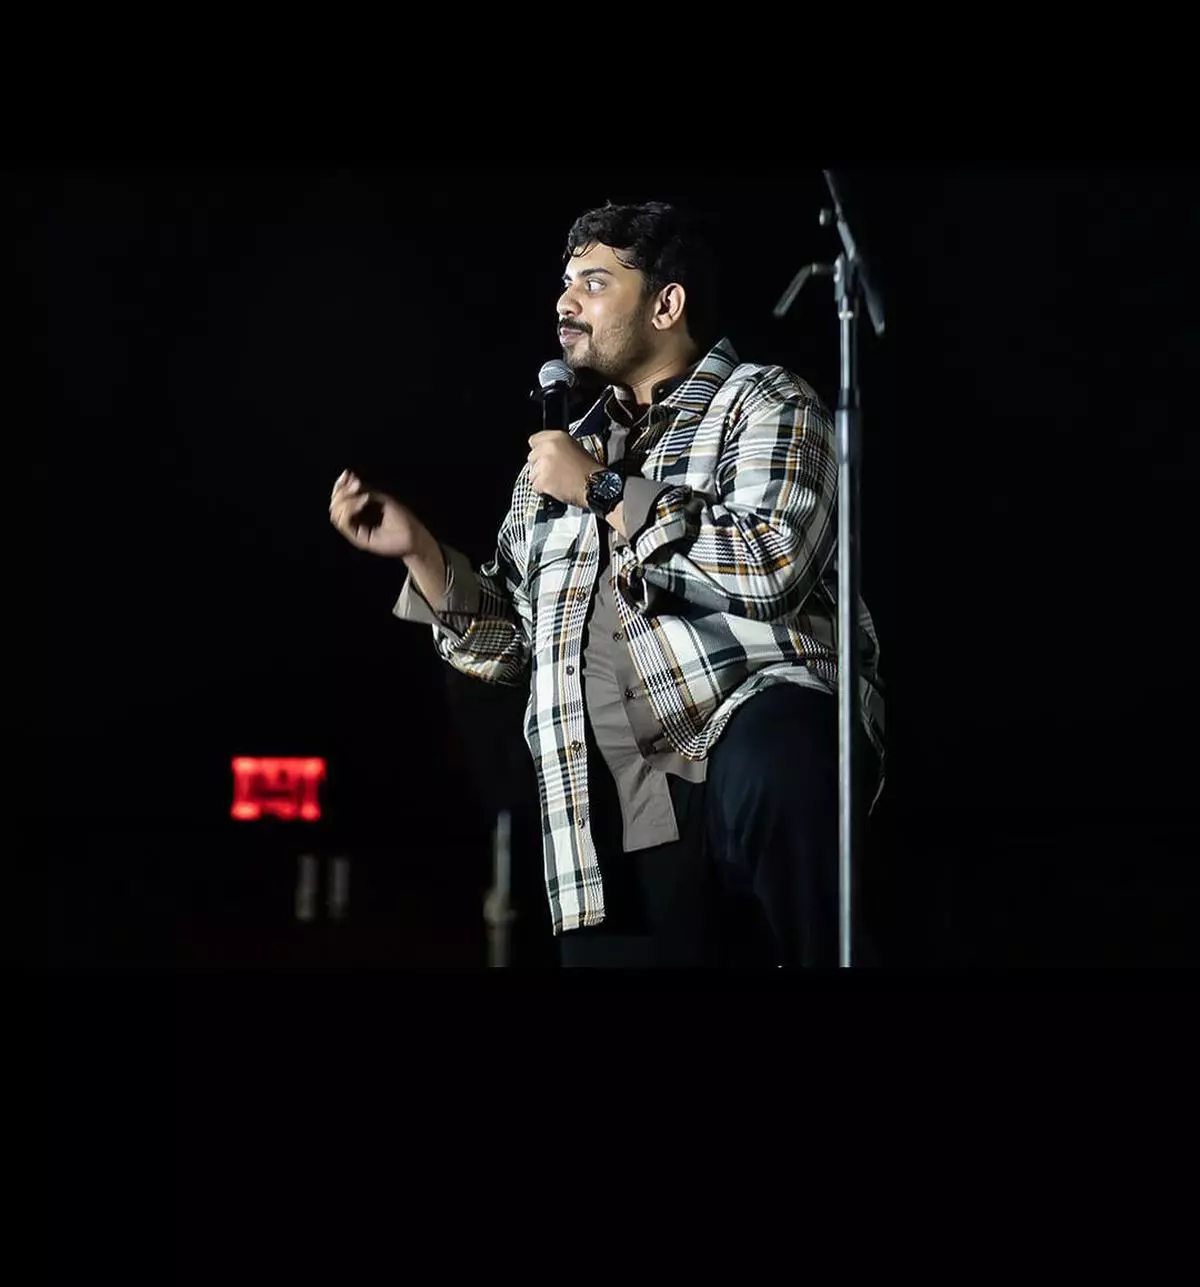 The stand-up comedian Vikram Arul Vidyapathi performing in Erode. His recent “Christian School vs ‘Normal’ School” comedy video sparked discussions. 